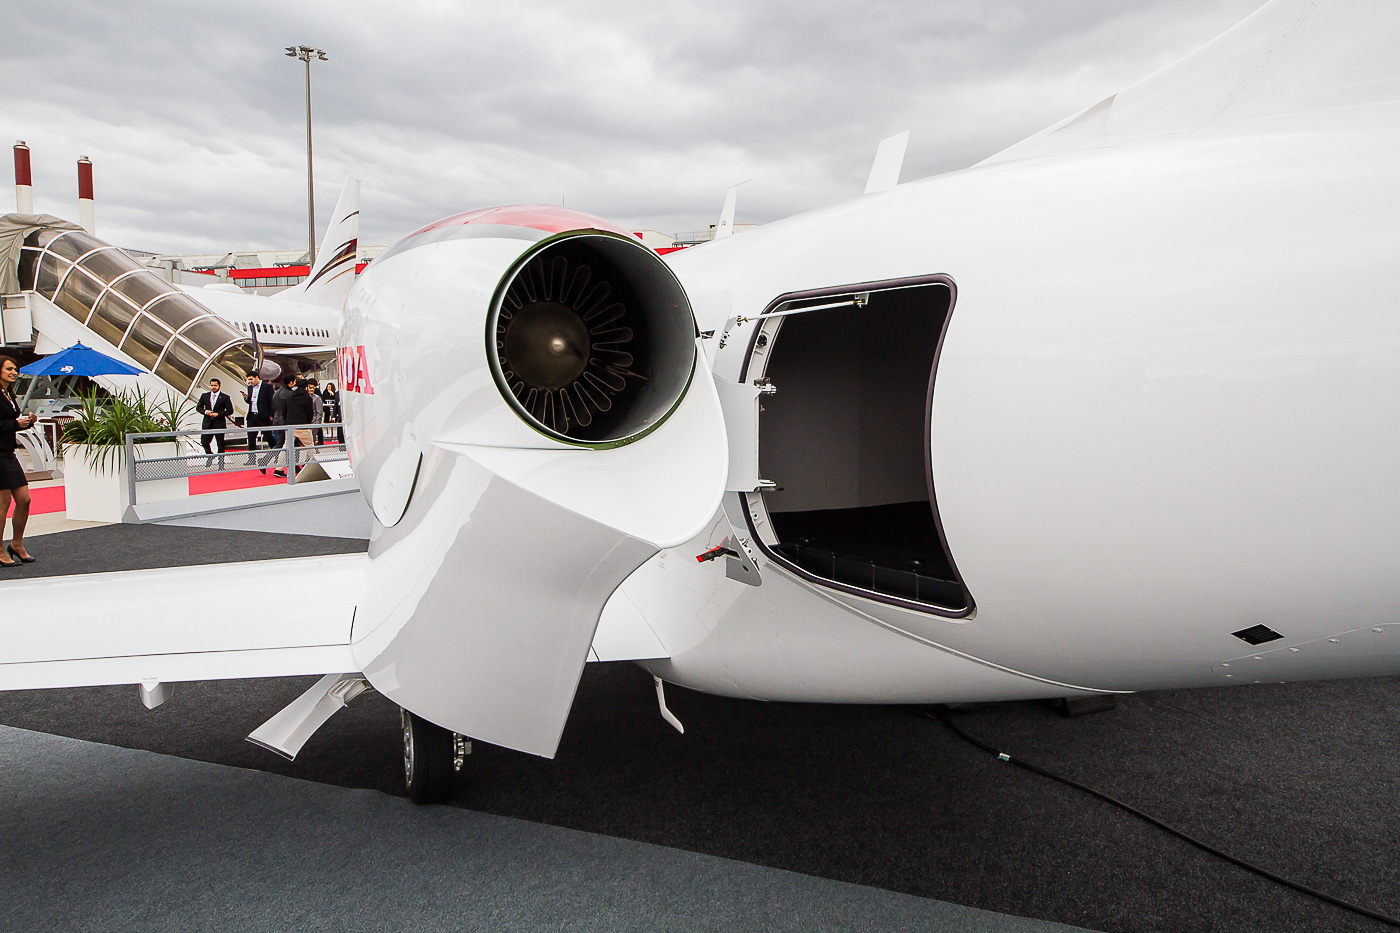 Ebace 2015 The Latest News And Innovations In Business